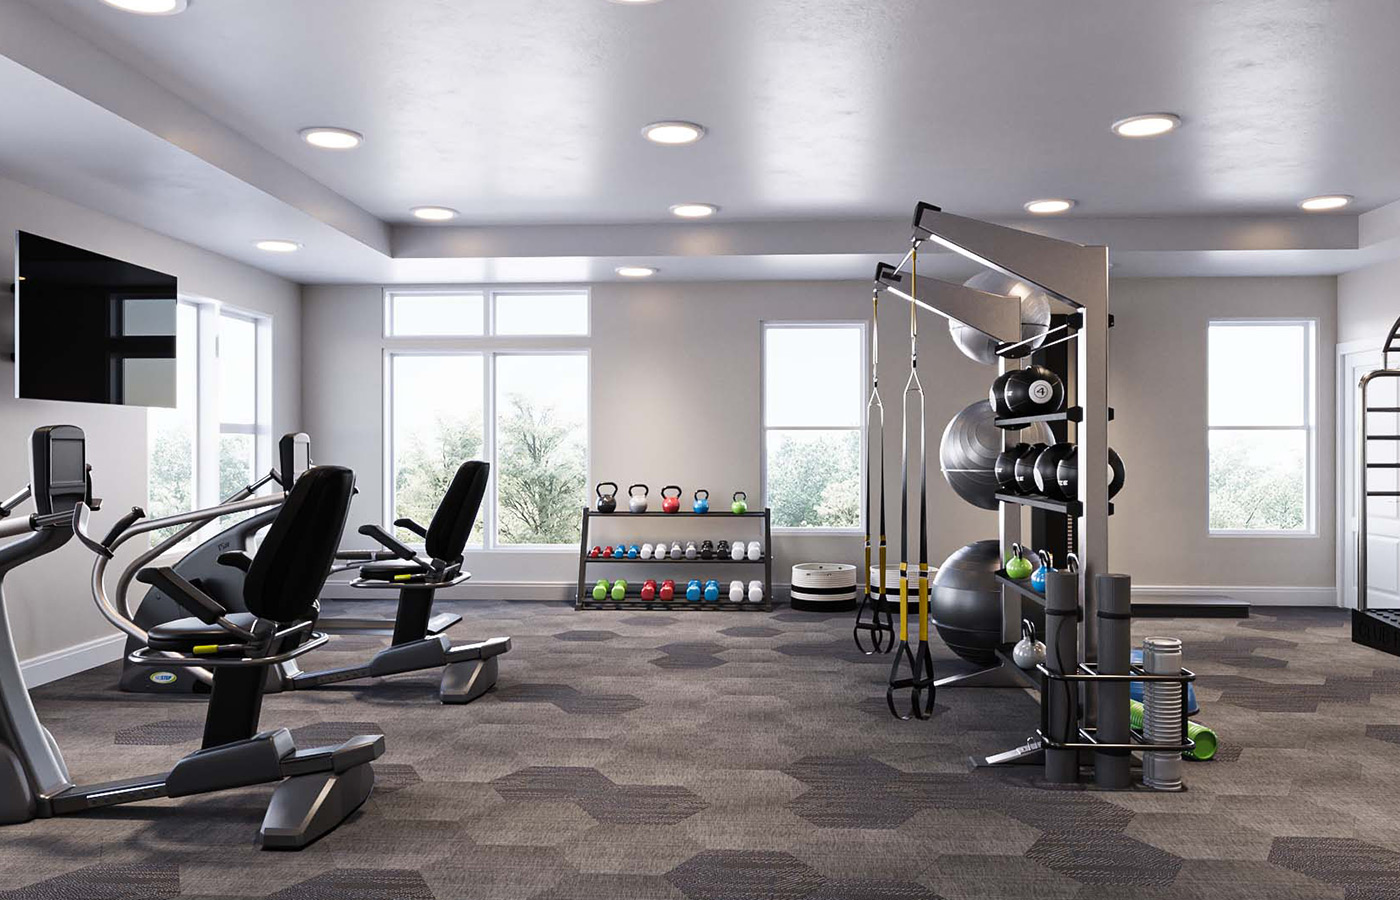 A fitness center with gym equipment.